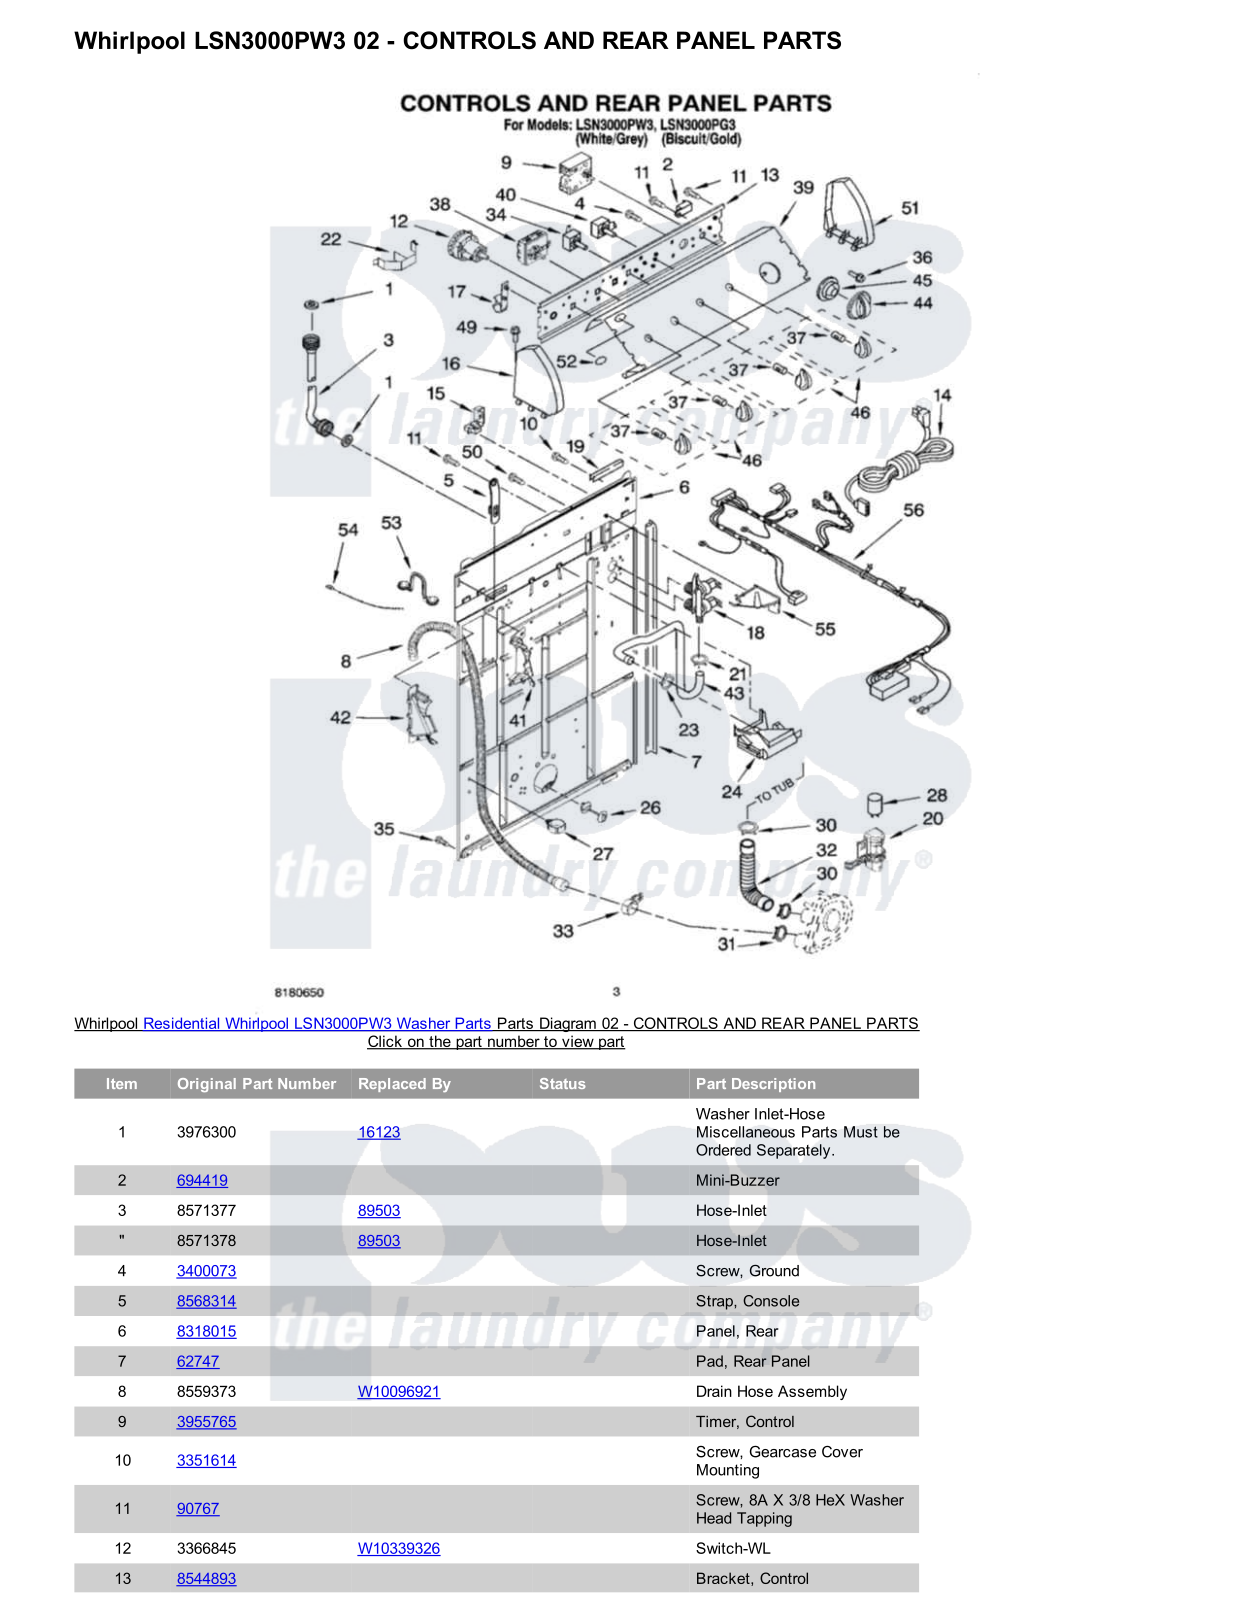 Whirlpool LSN3000PW3 Parts Diagram